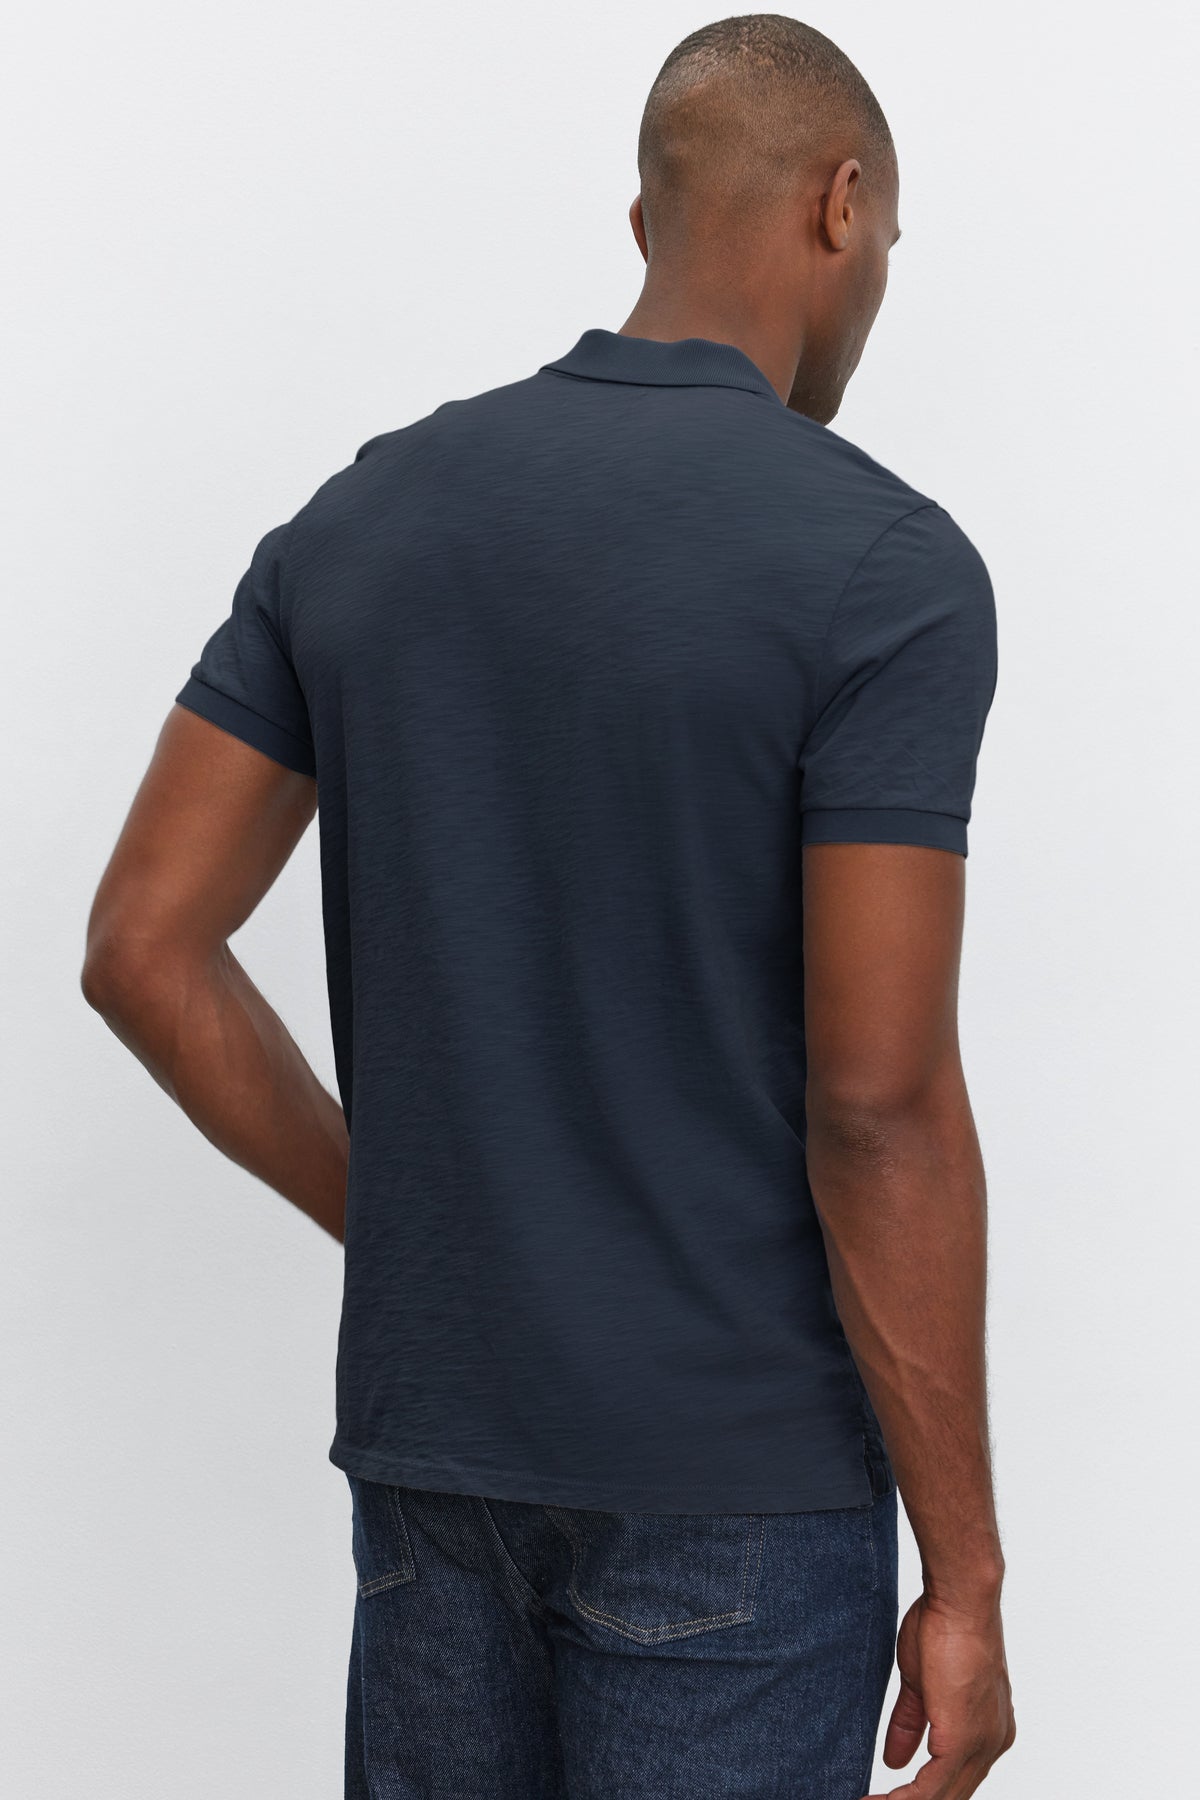 Rear view of a man wearing a Velvet by Graham & Spencer NIKO polo shirt with heathered texture and denim jeans, standing against a white background.-36890752811201